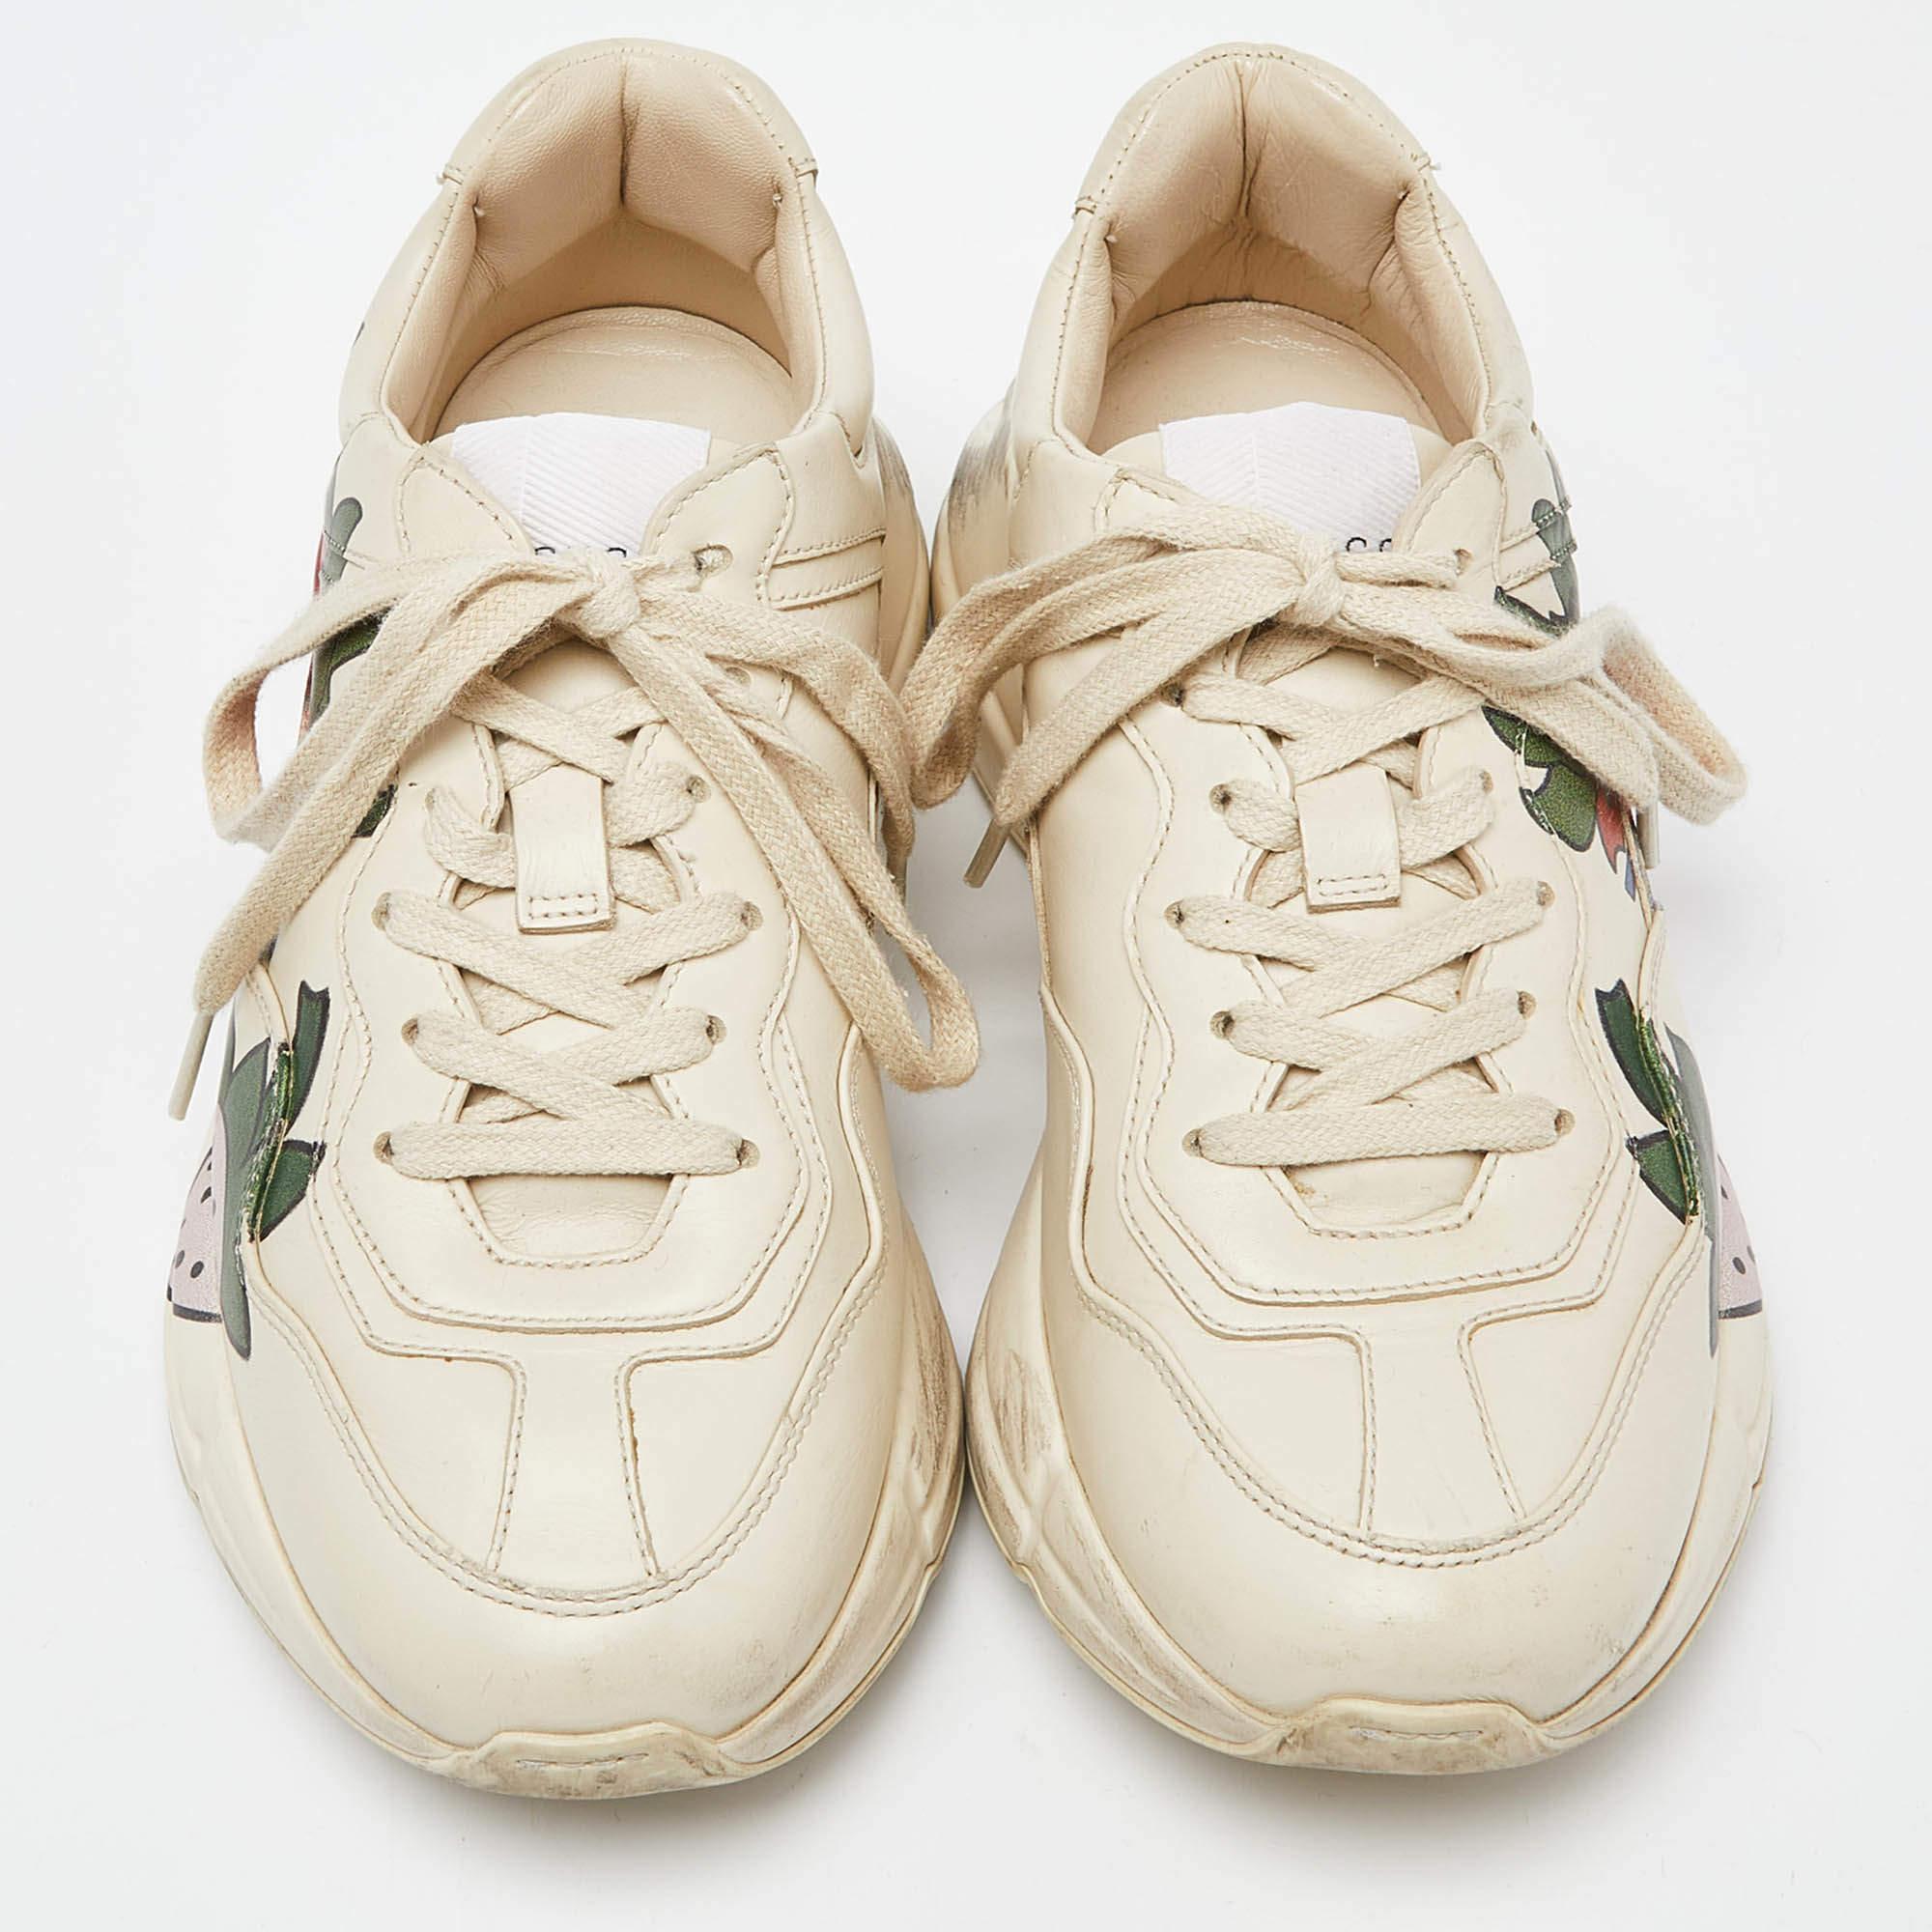 Give your outfit a luxe update with this pair of Gucci Rhyton sneakers. The shoes are sewn perfectly to help you make a statement in them for a long time.

